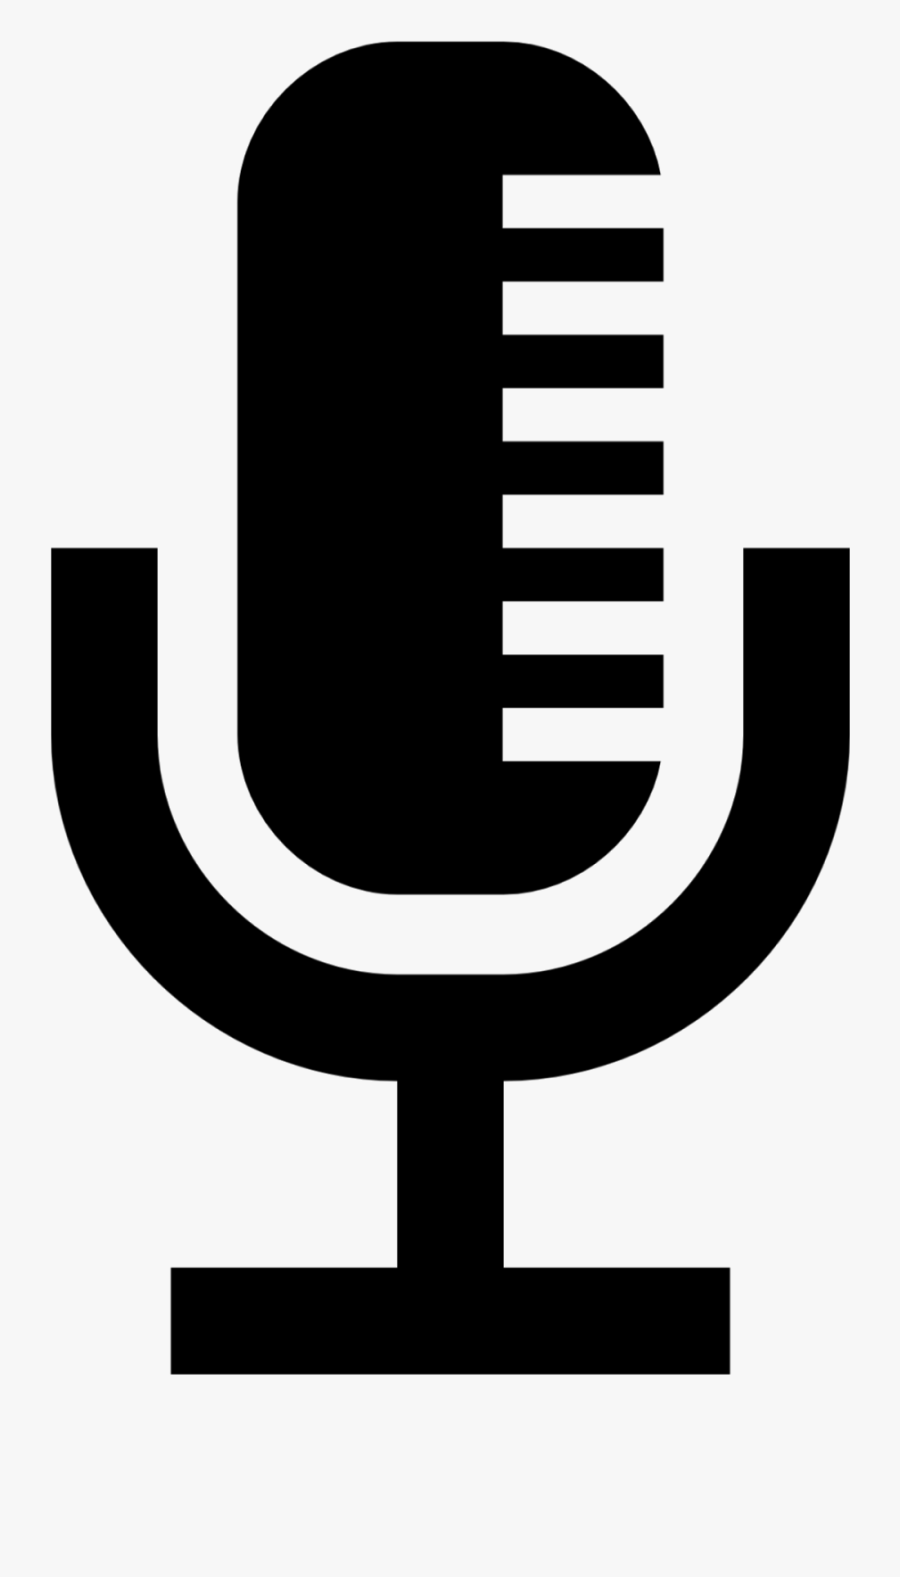 Radio Microphone Free Clipart Images - Radio Mic Clipart, Transparent Clipart